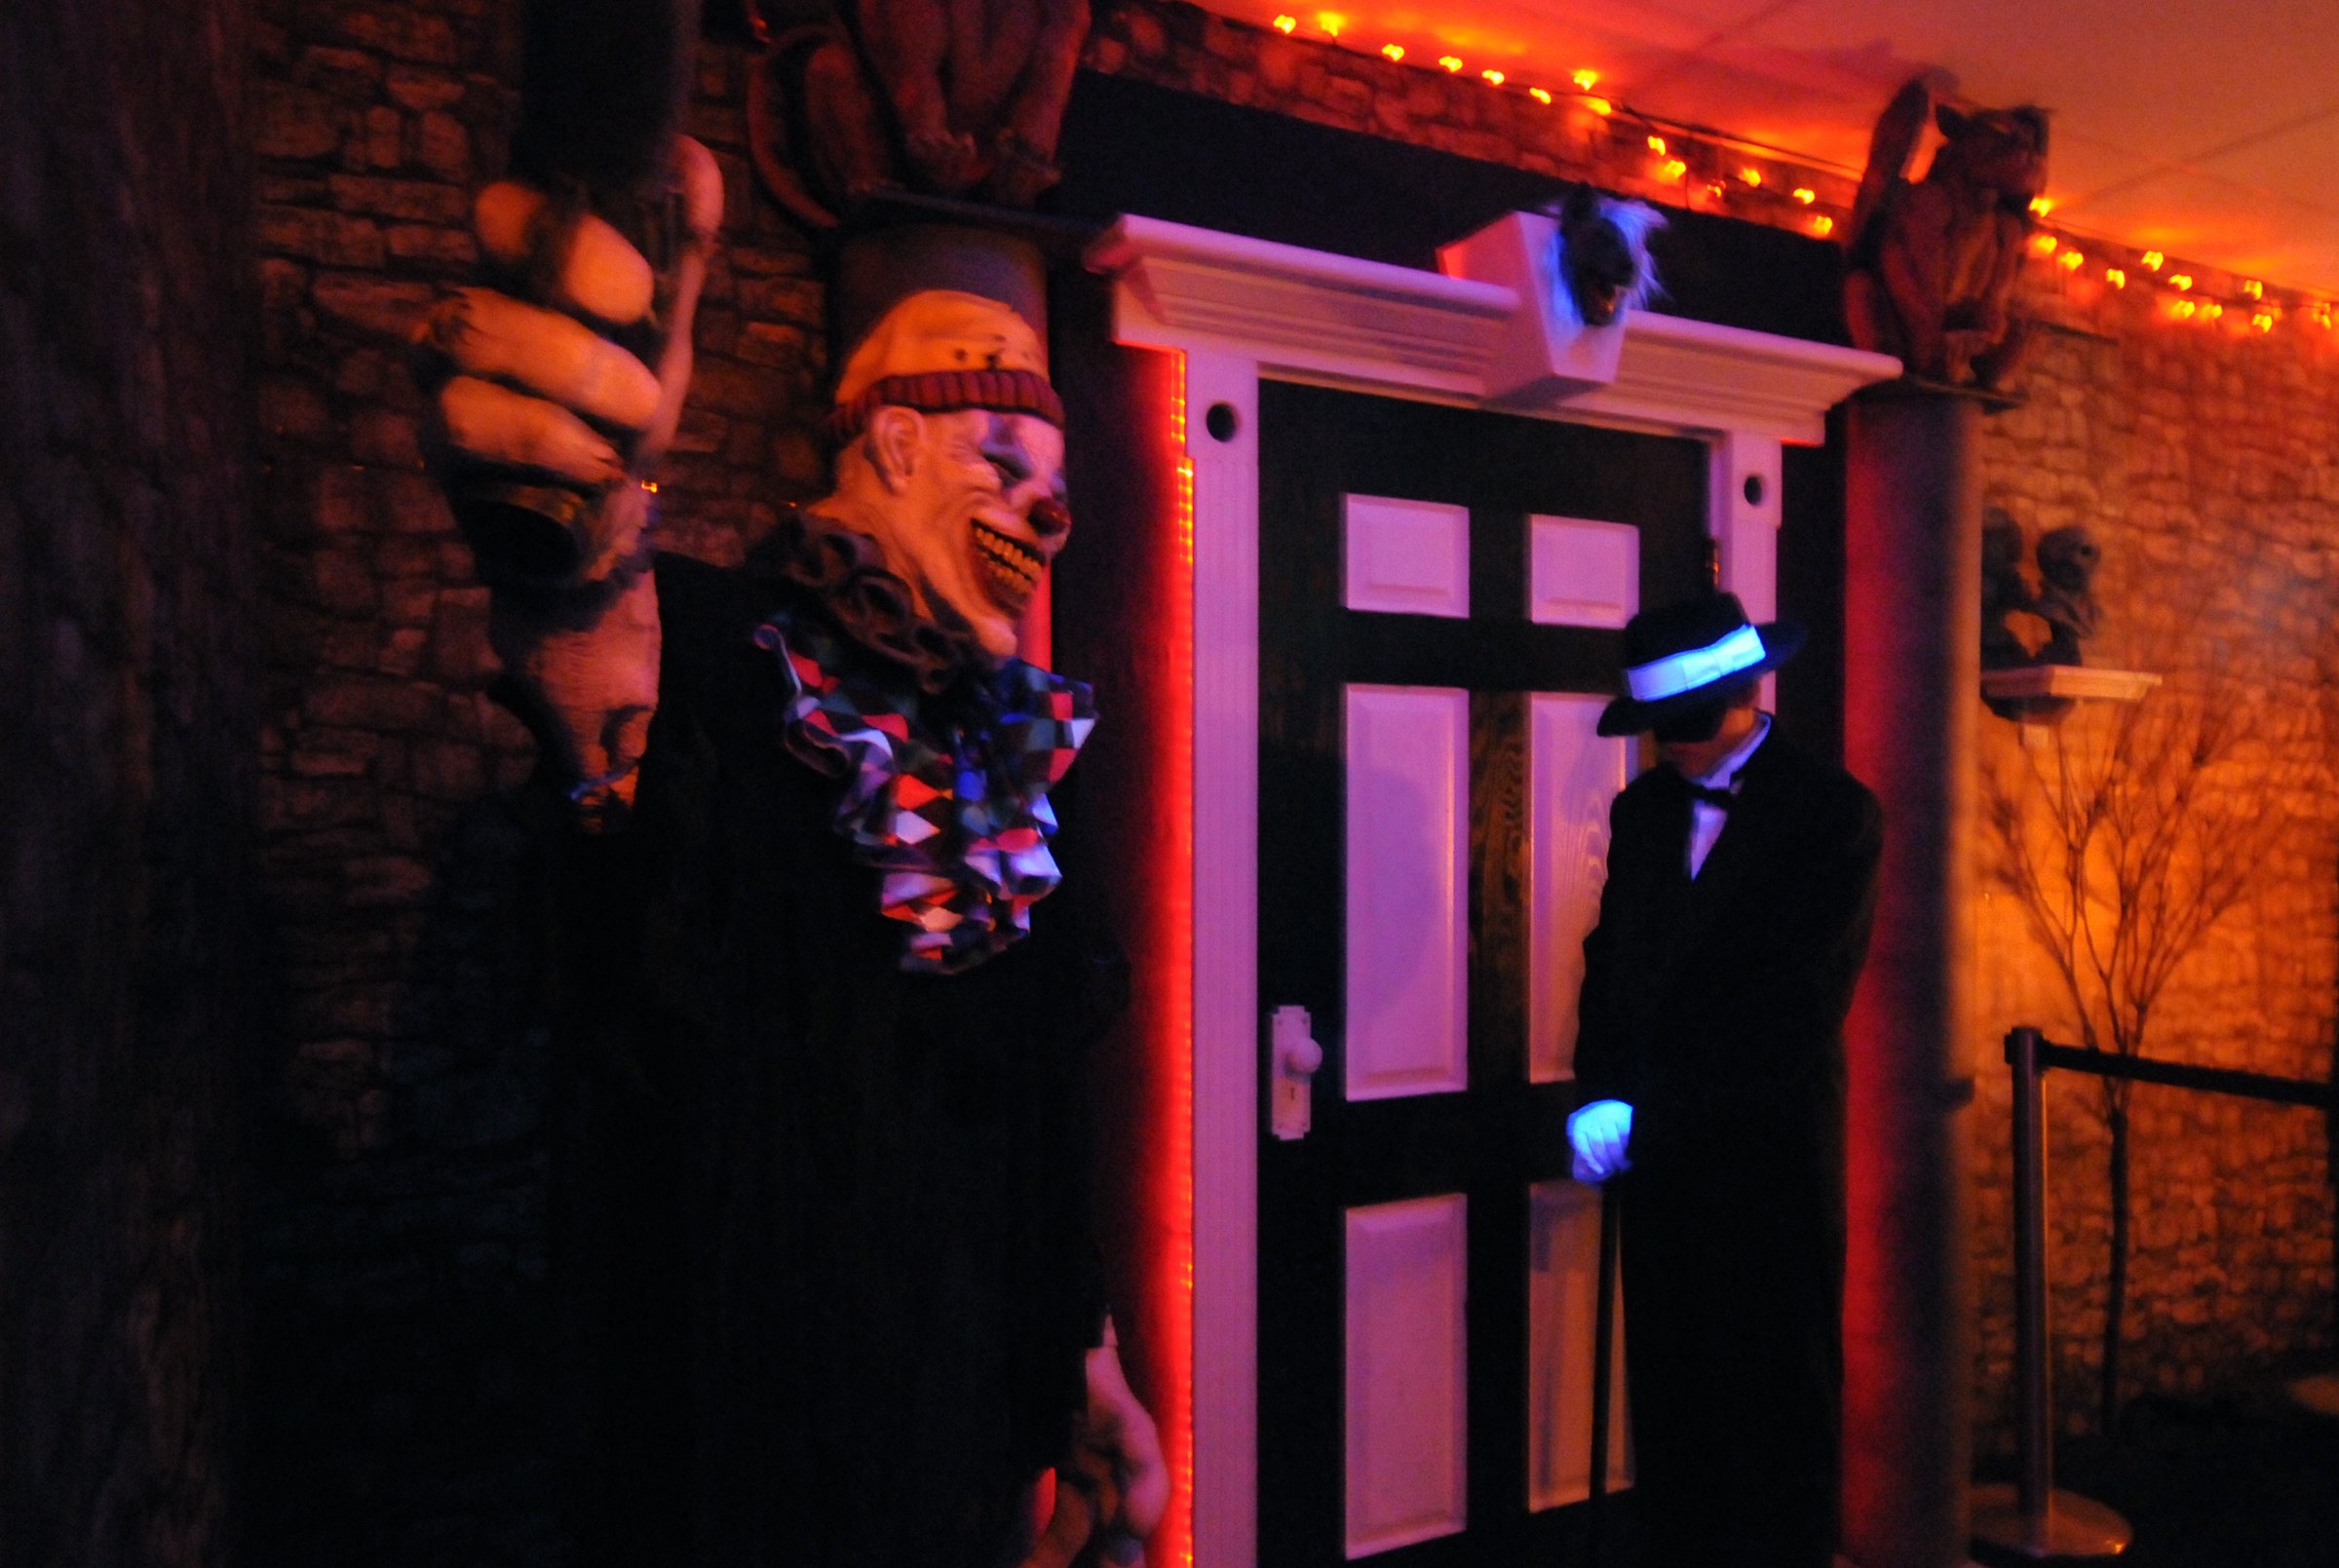 ENTER- This year marks the 20th anniversary of the Zed Haunted House and the theme this year is the Twilight Zone.